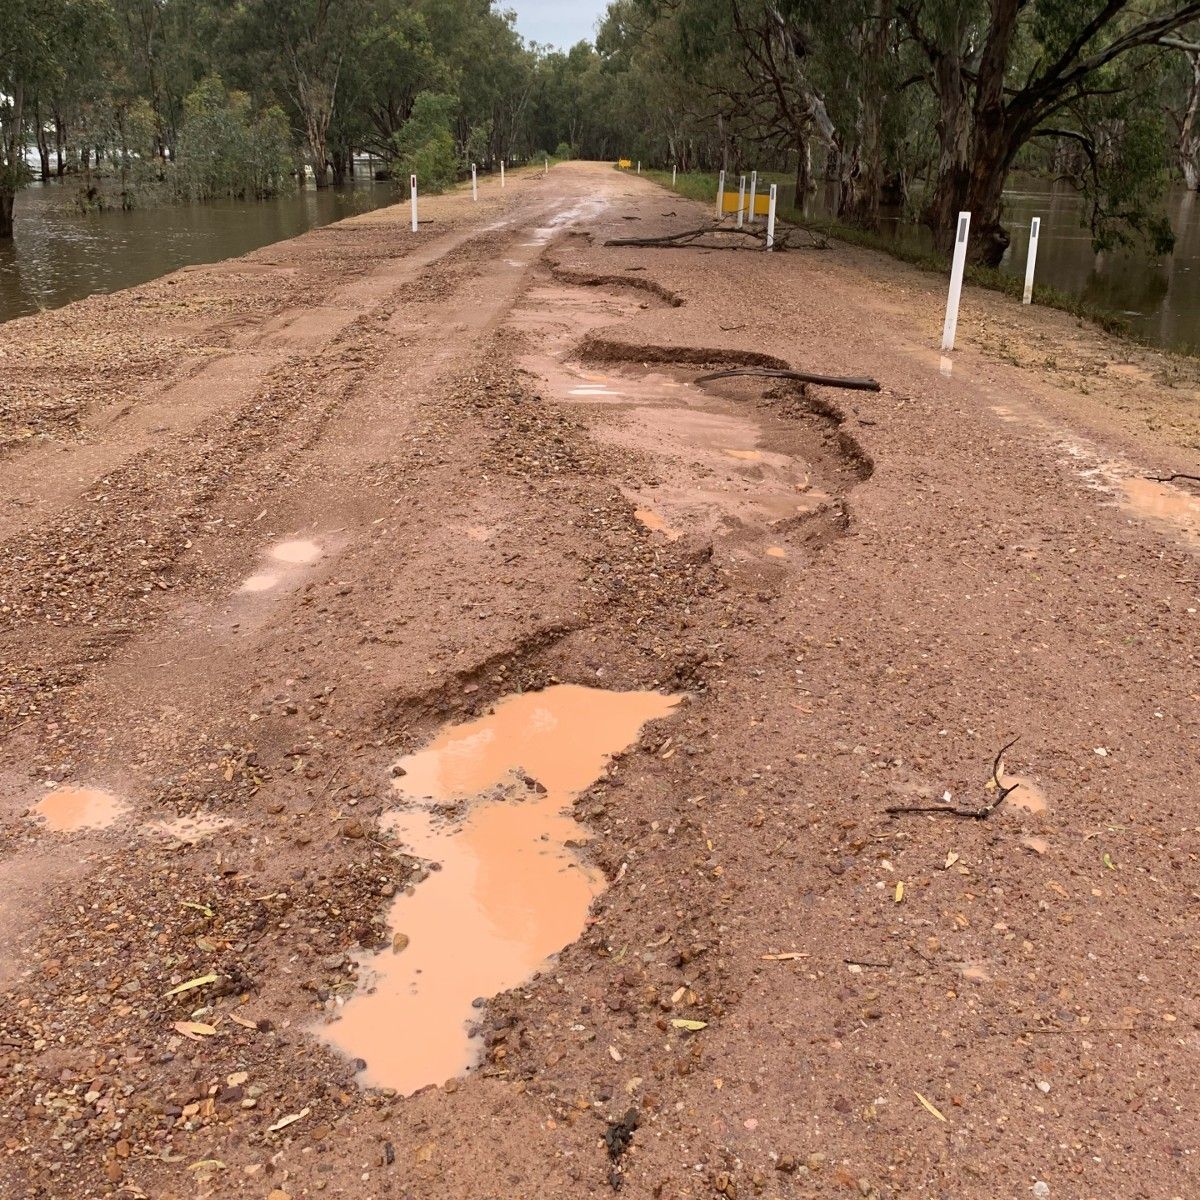 Road surface damaged by flood waters